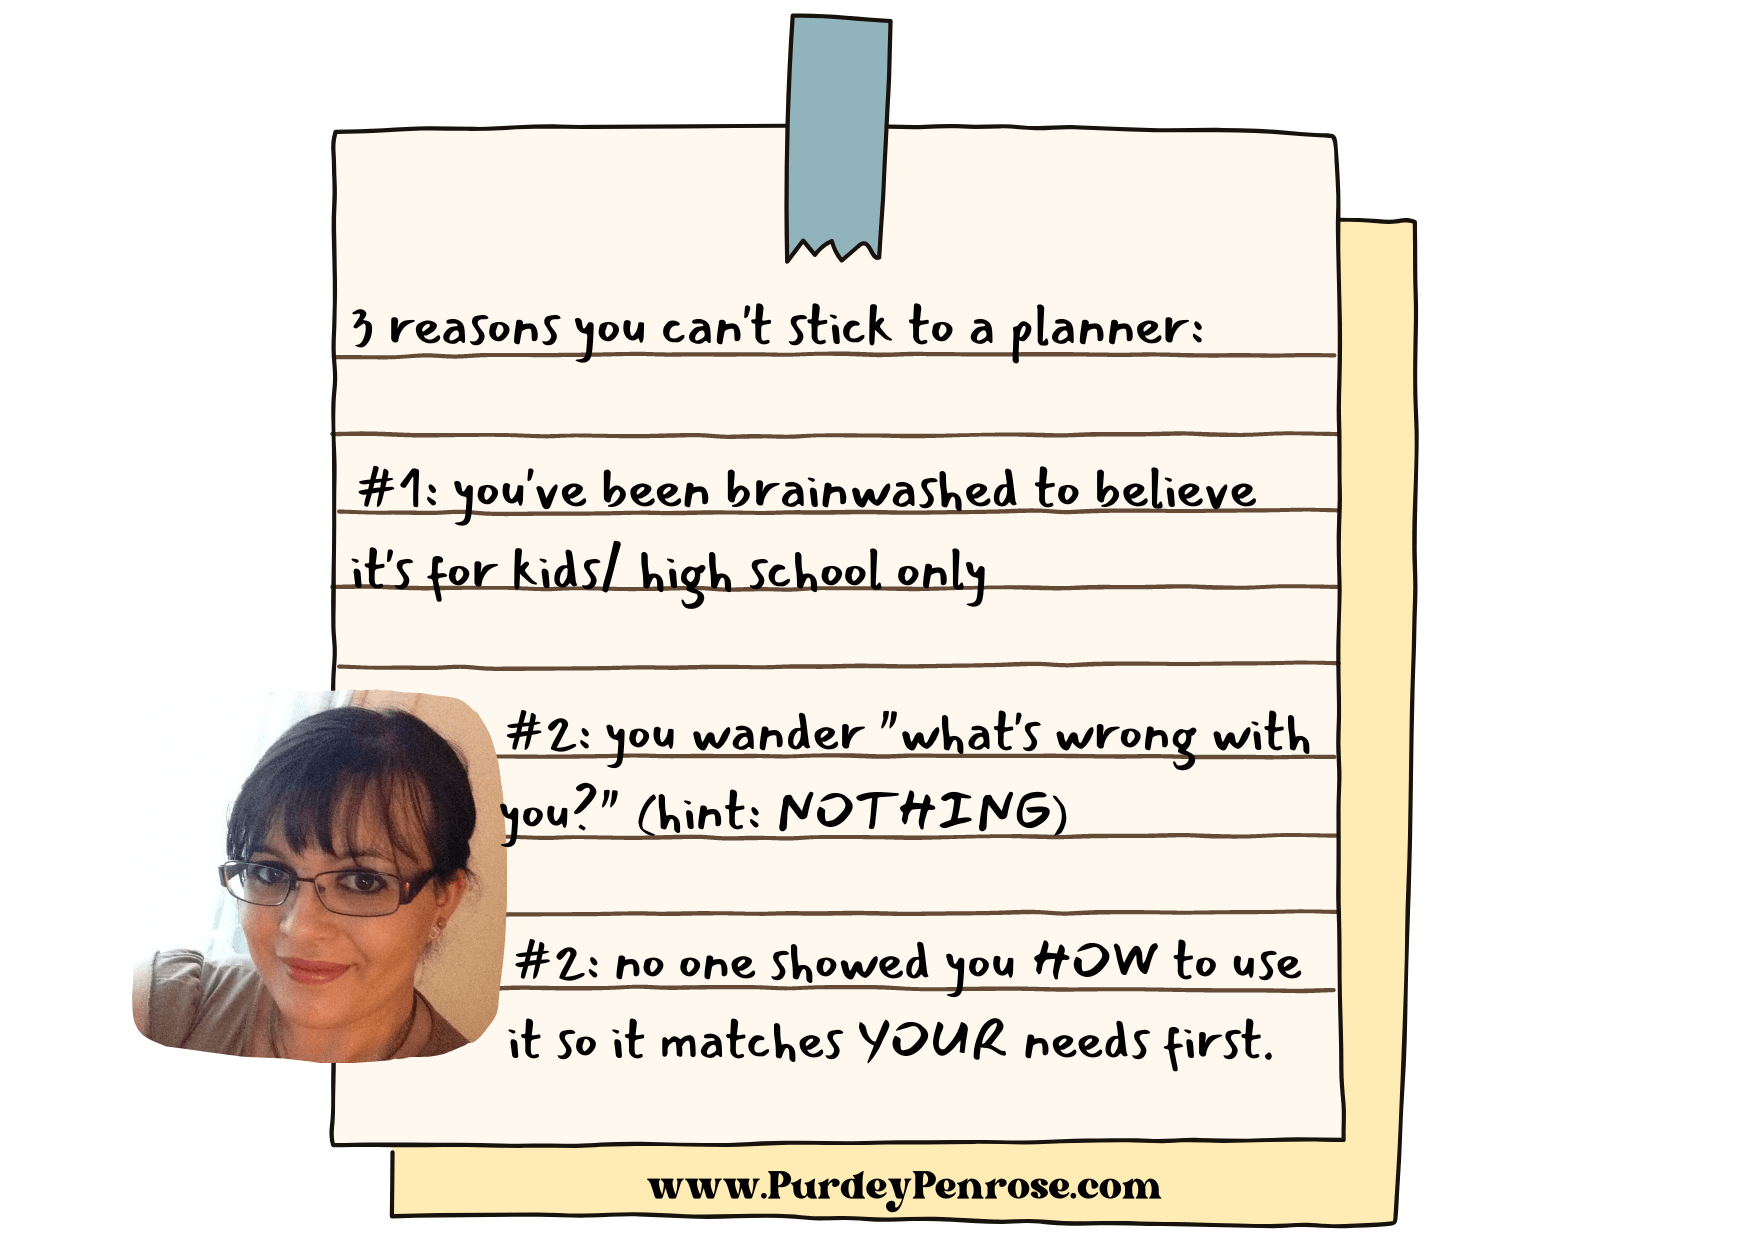 3 reasons why sticking to a planner is hard as adults